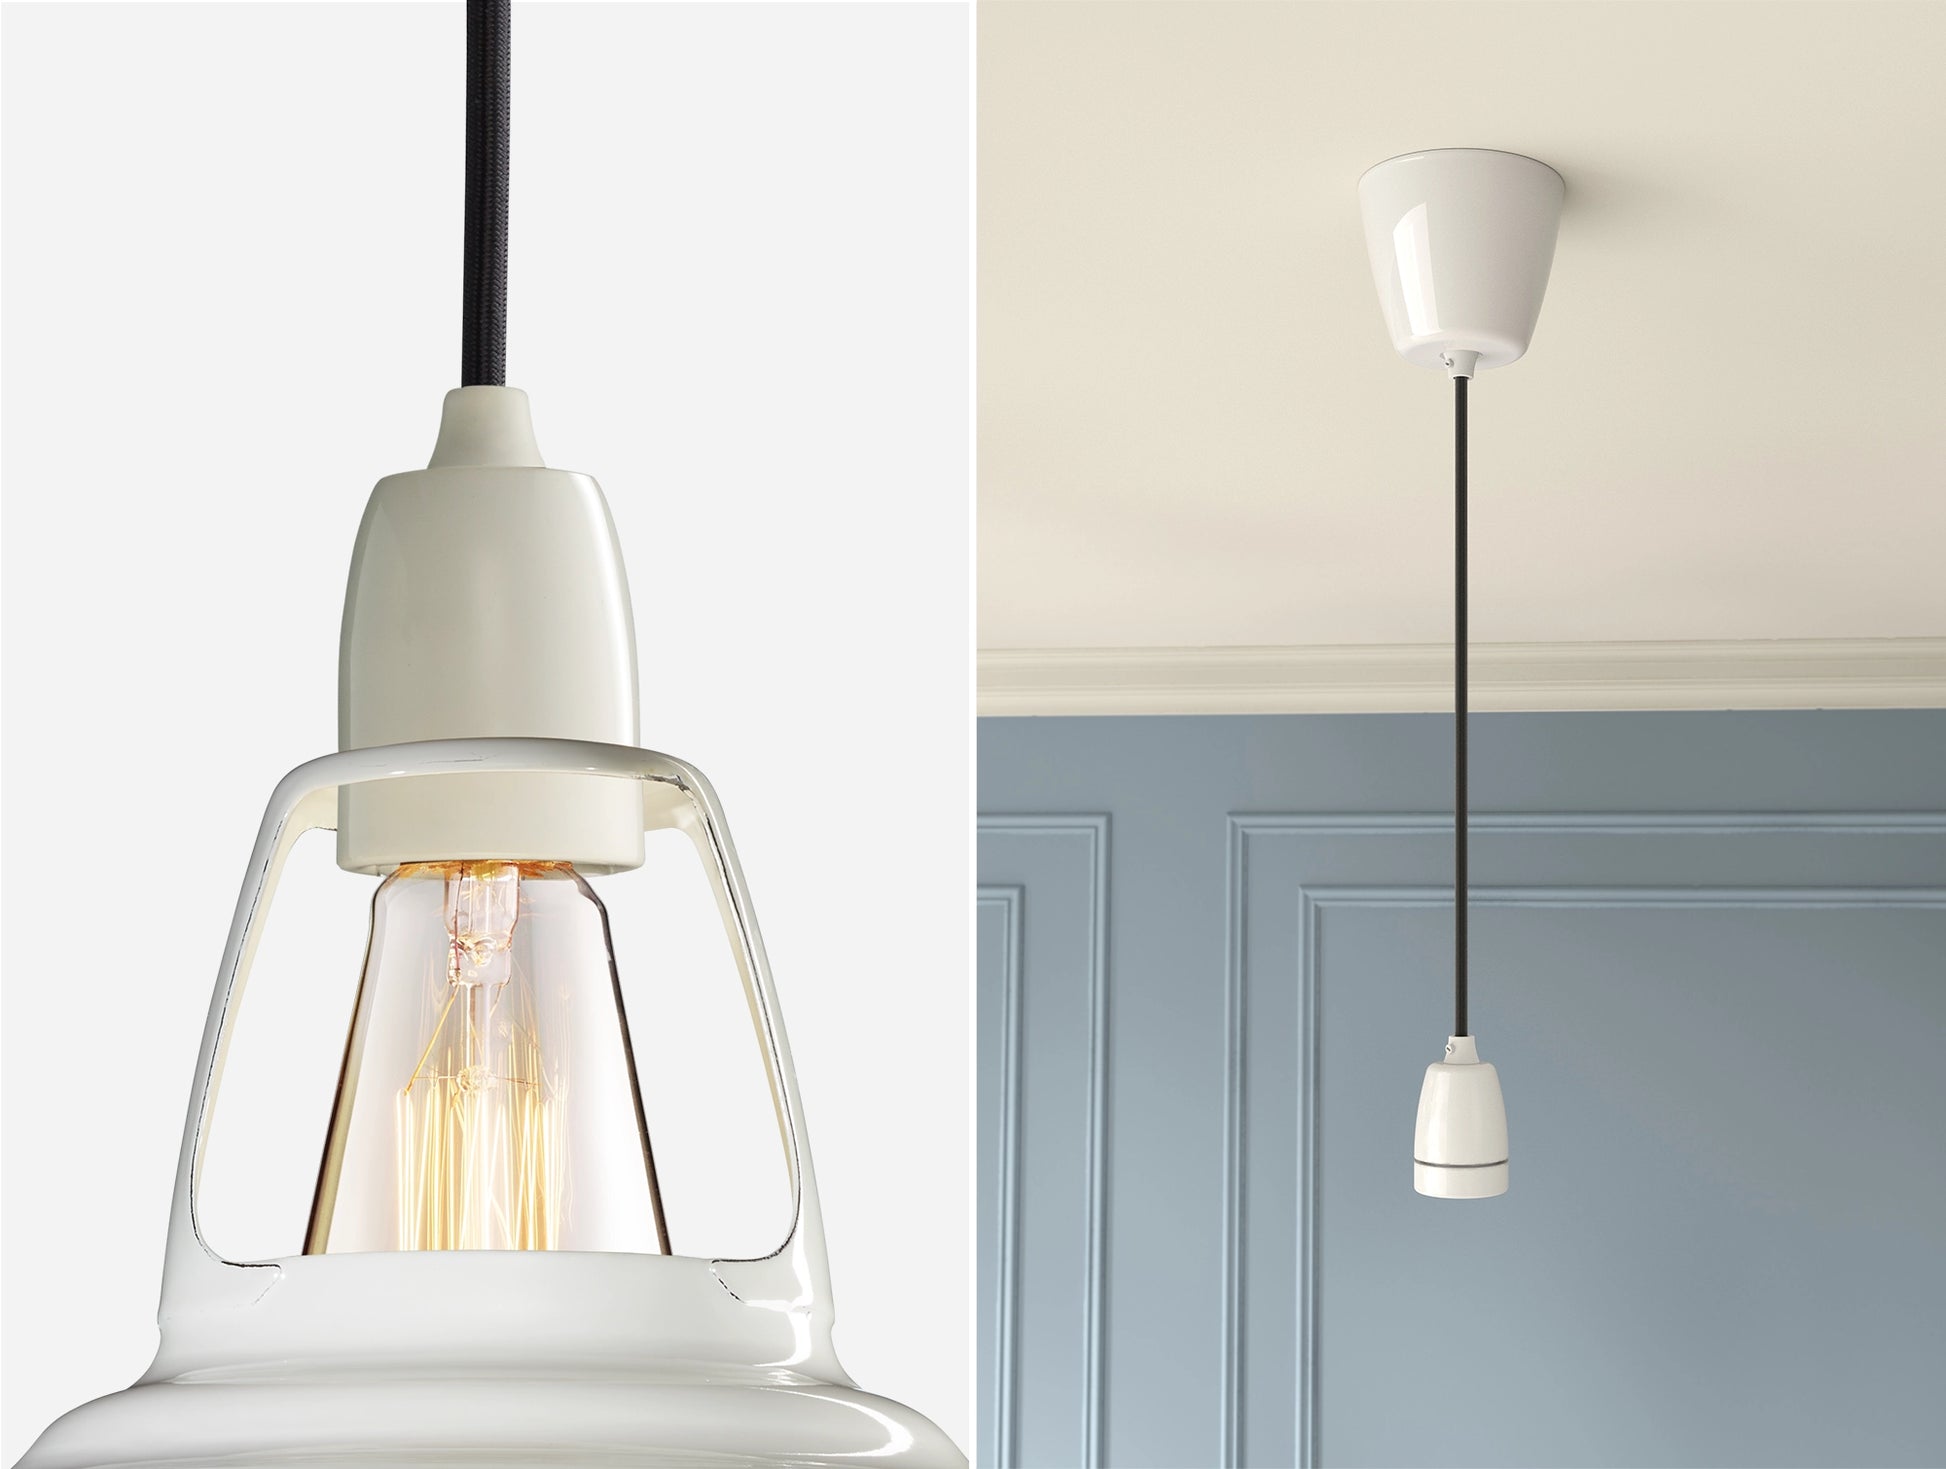 Close up of an E27 Porcelain suspension set on a Original White lampshade on the left. On the right, an E27 Porcelain pendant set is hanging from the ceiling